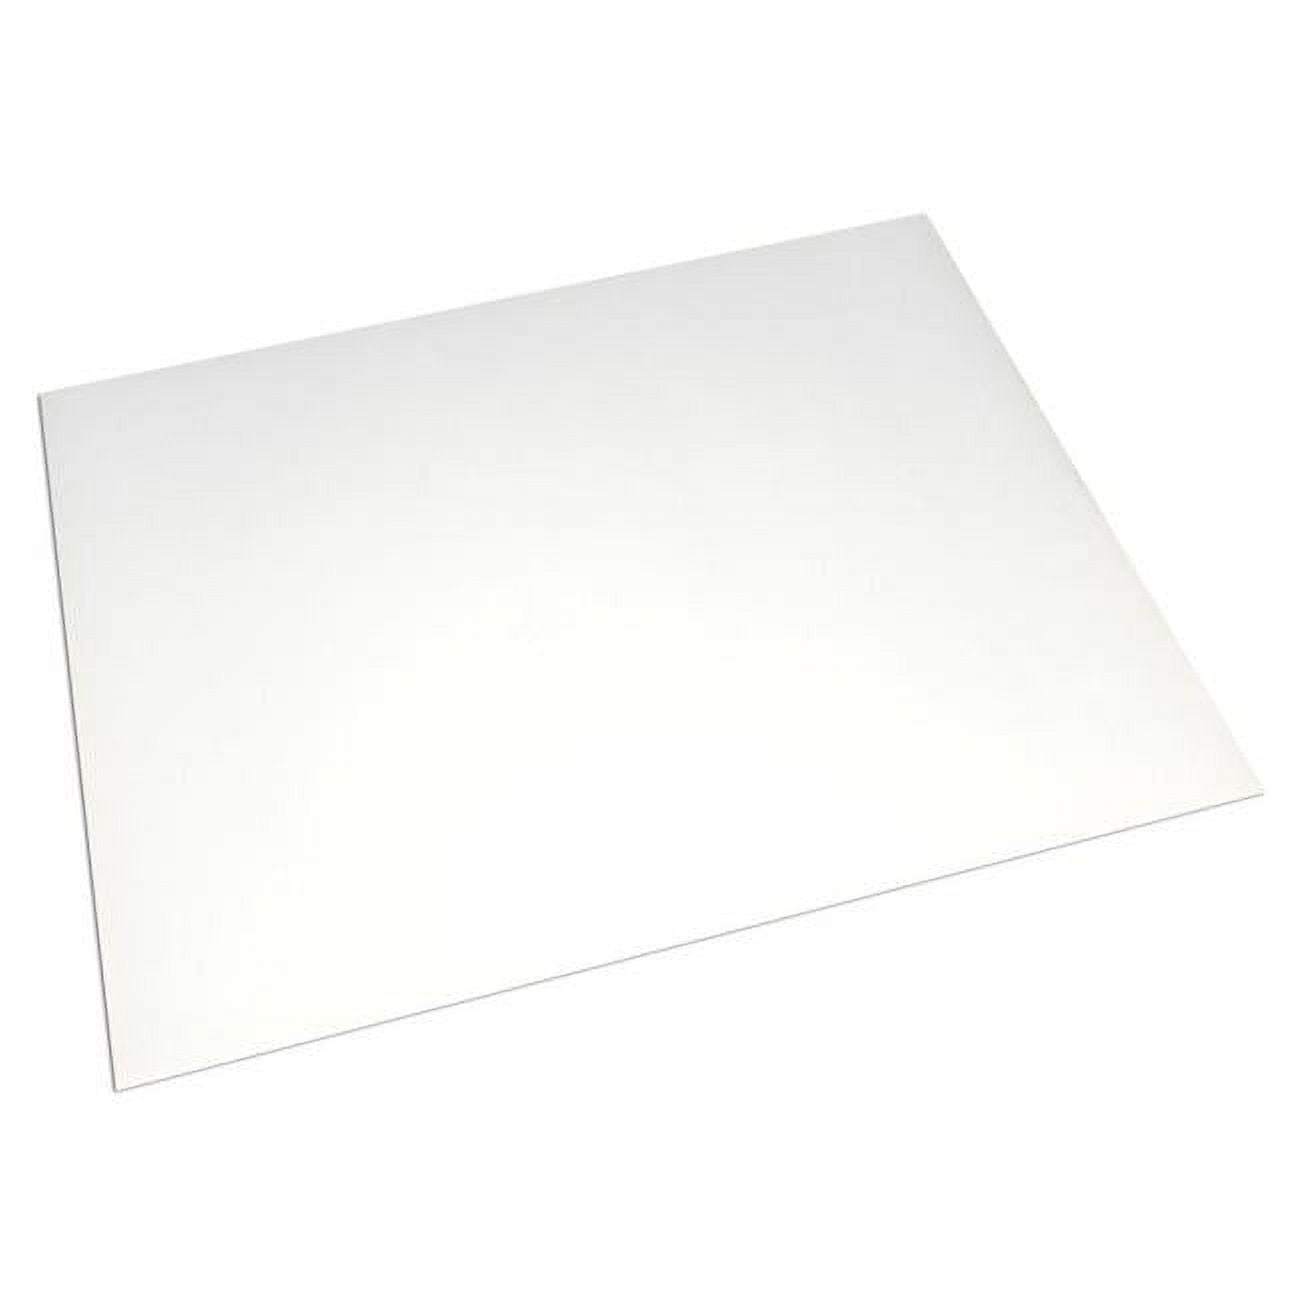  Glenmal 100 Sheets of Poster Paper Poster Board Paper, 22 x 28  Inches, Construction Paper, White, 157g Gauge, Art White Paper, Can Be  Applied for Posters, Signs and Printing : Office Products